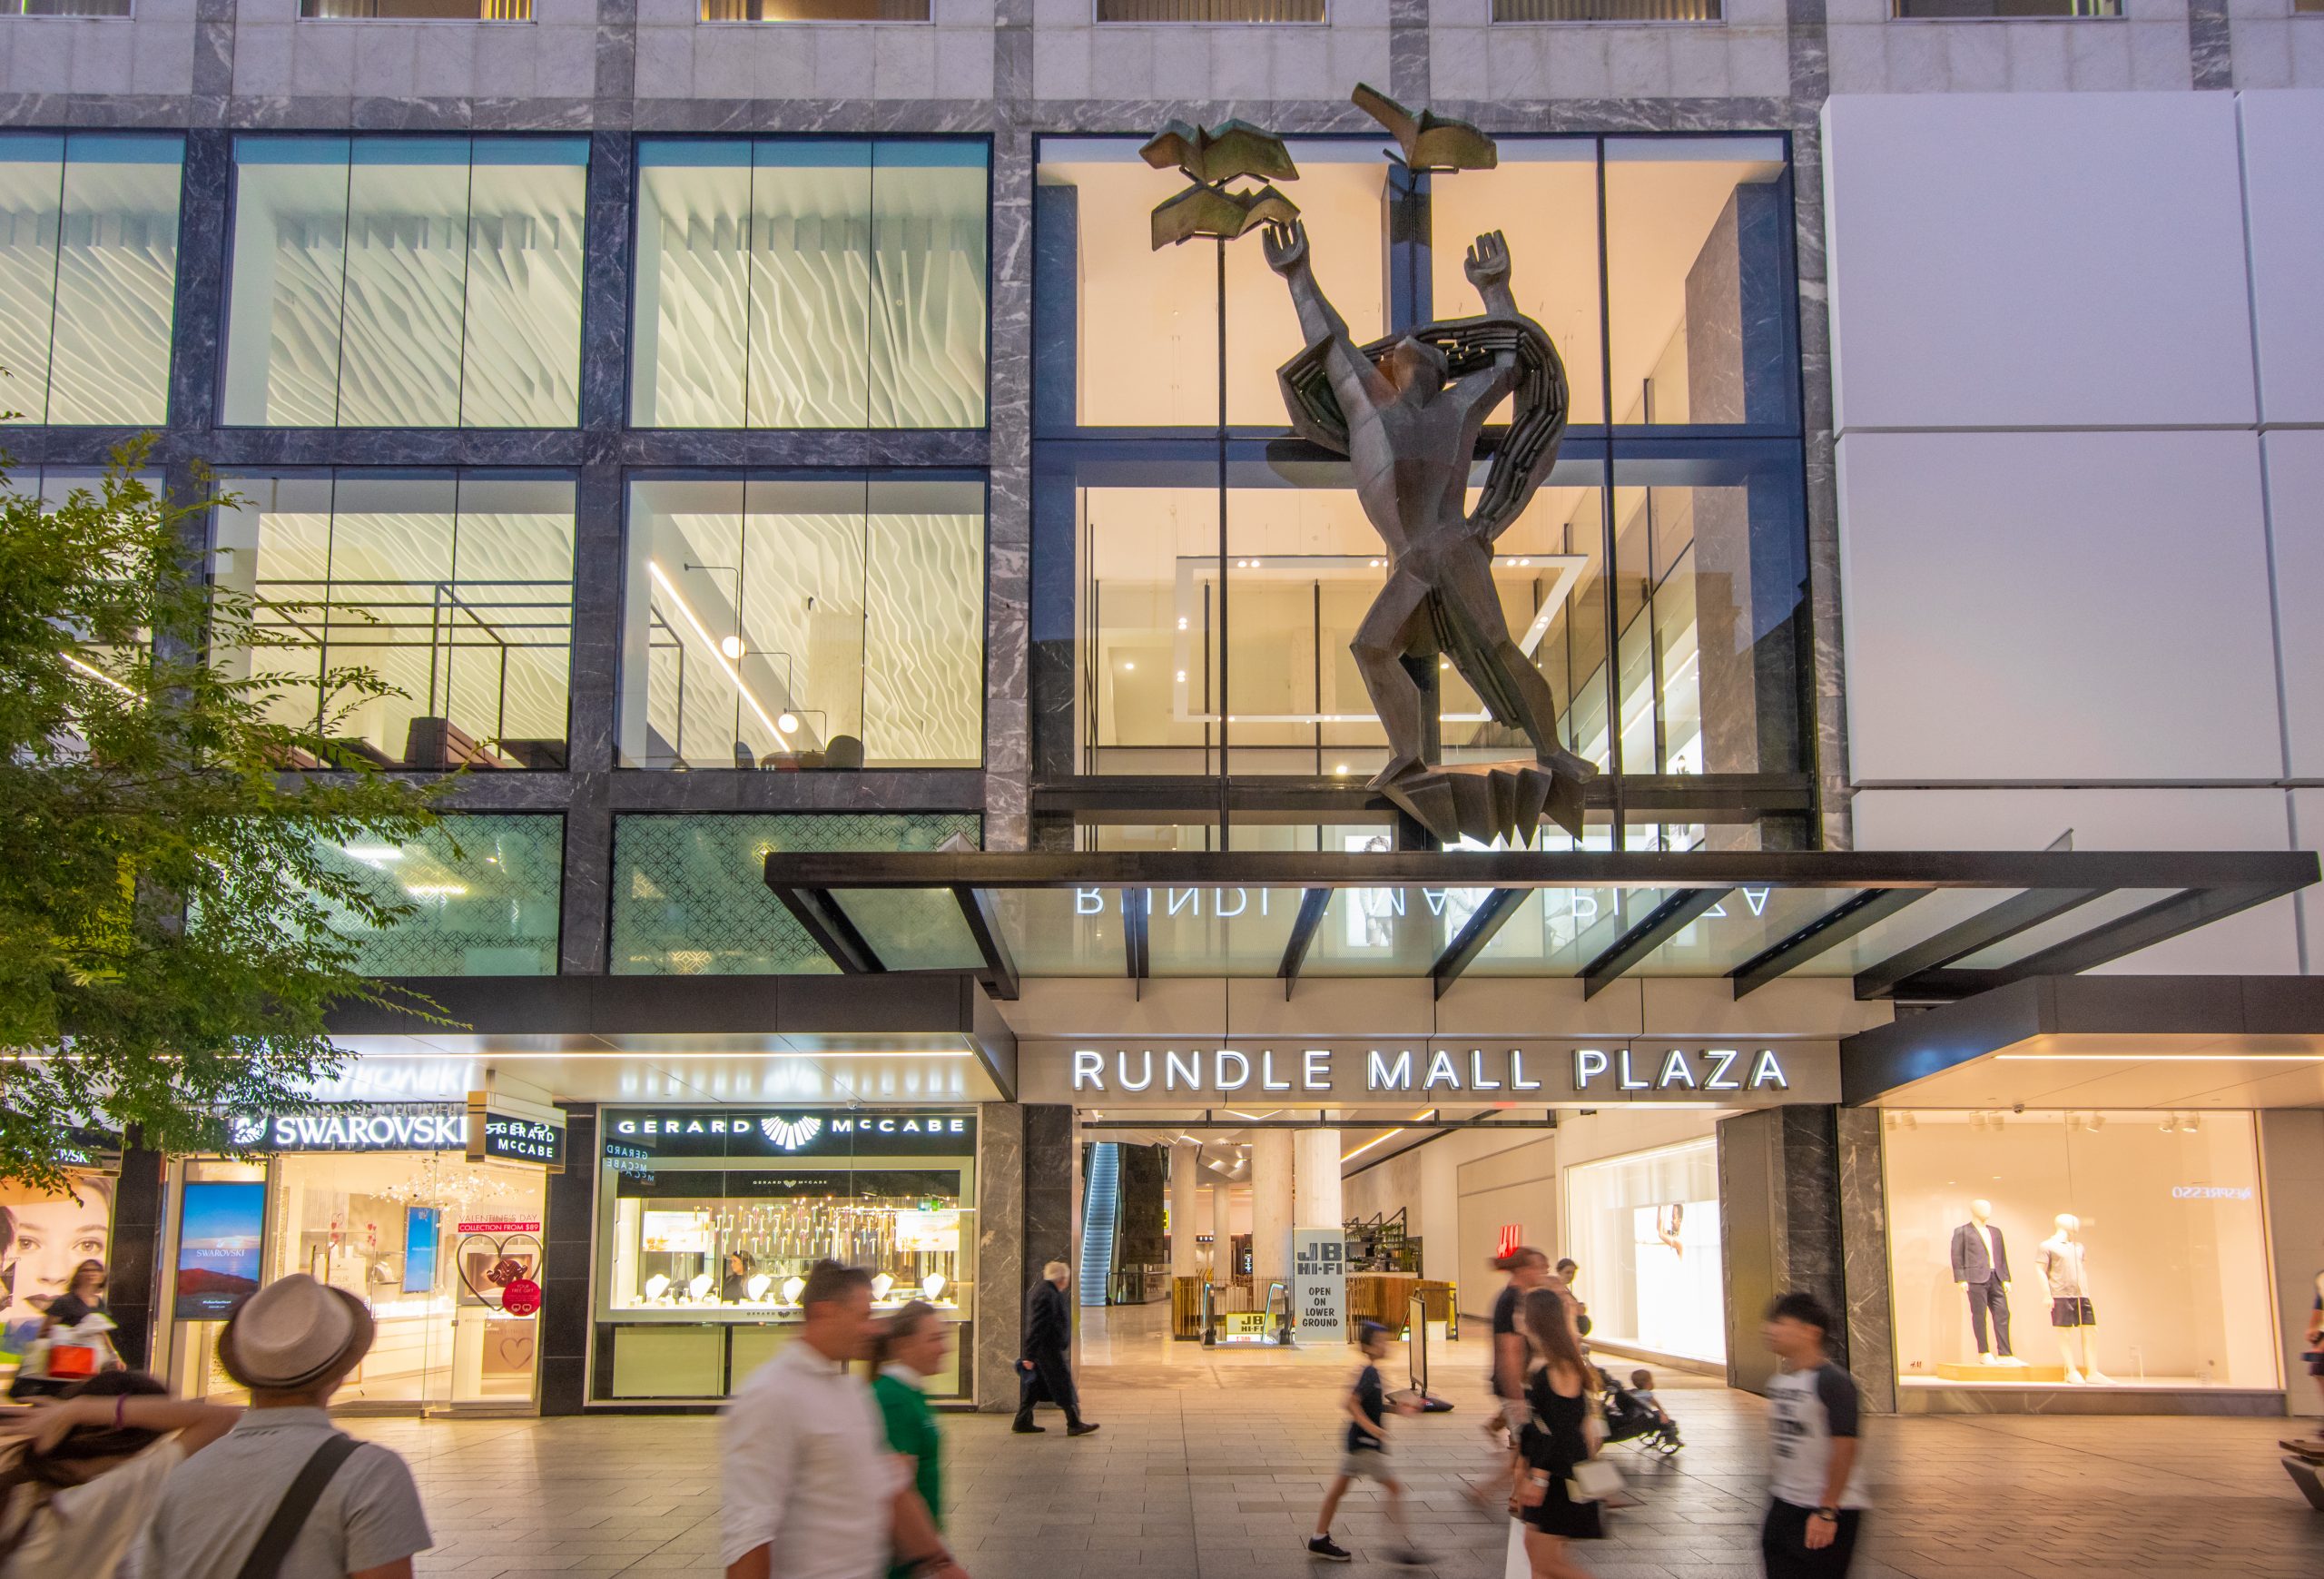 Subway - Rundle Place • Rundle Mall